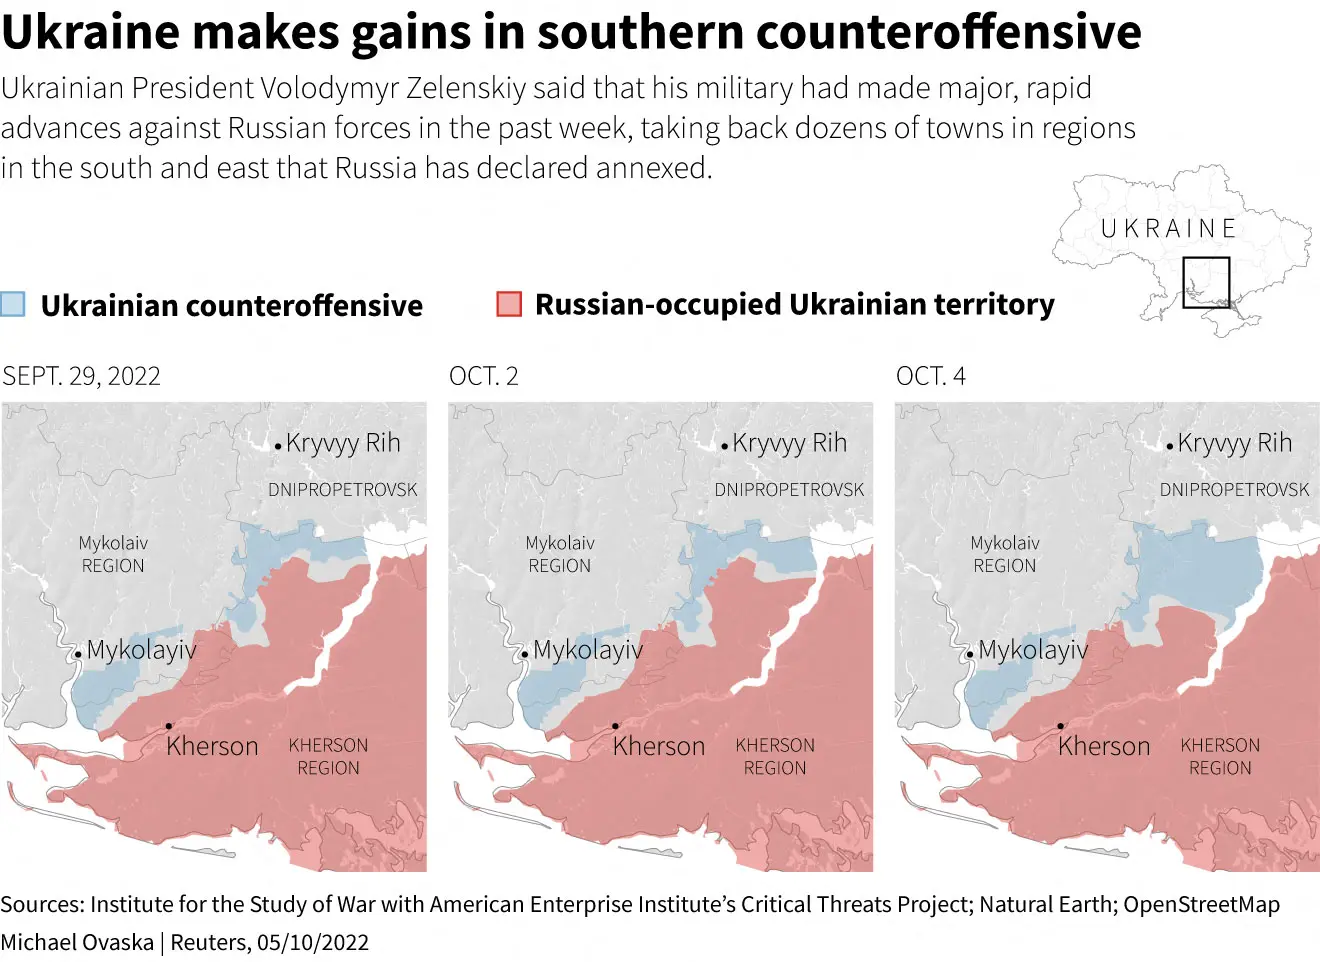 Ukraine’s swift advance since driving Russian forces away from the capital in March has turned the tide in the seven-month war Map showing Ukraine's advances against Russian forces in the past week